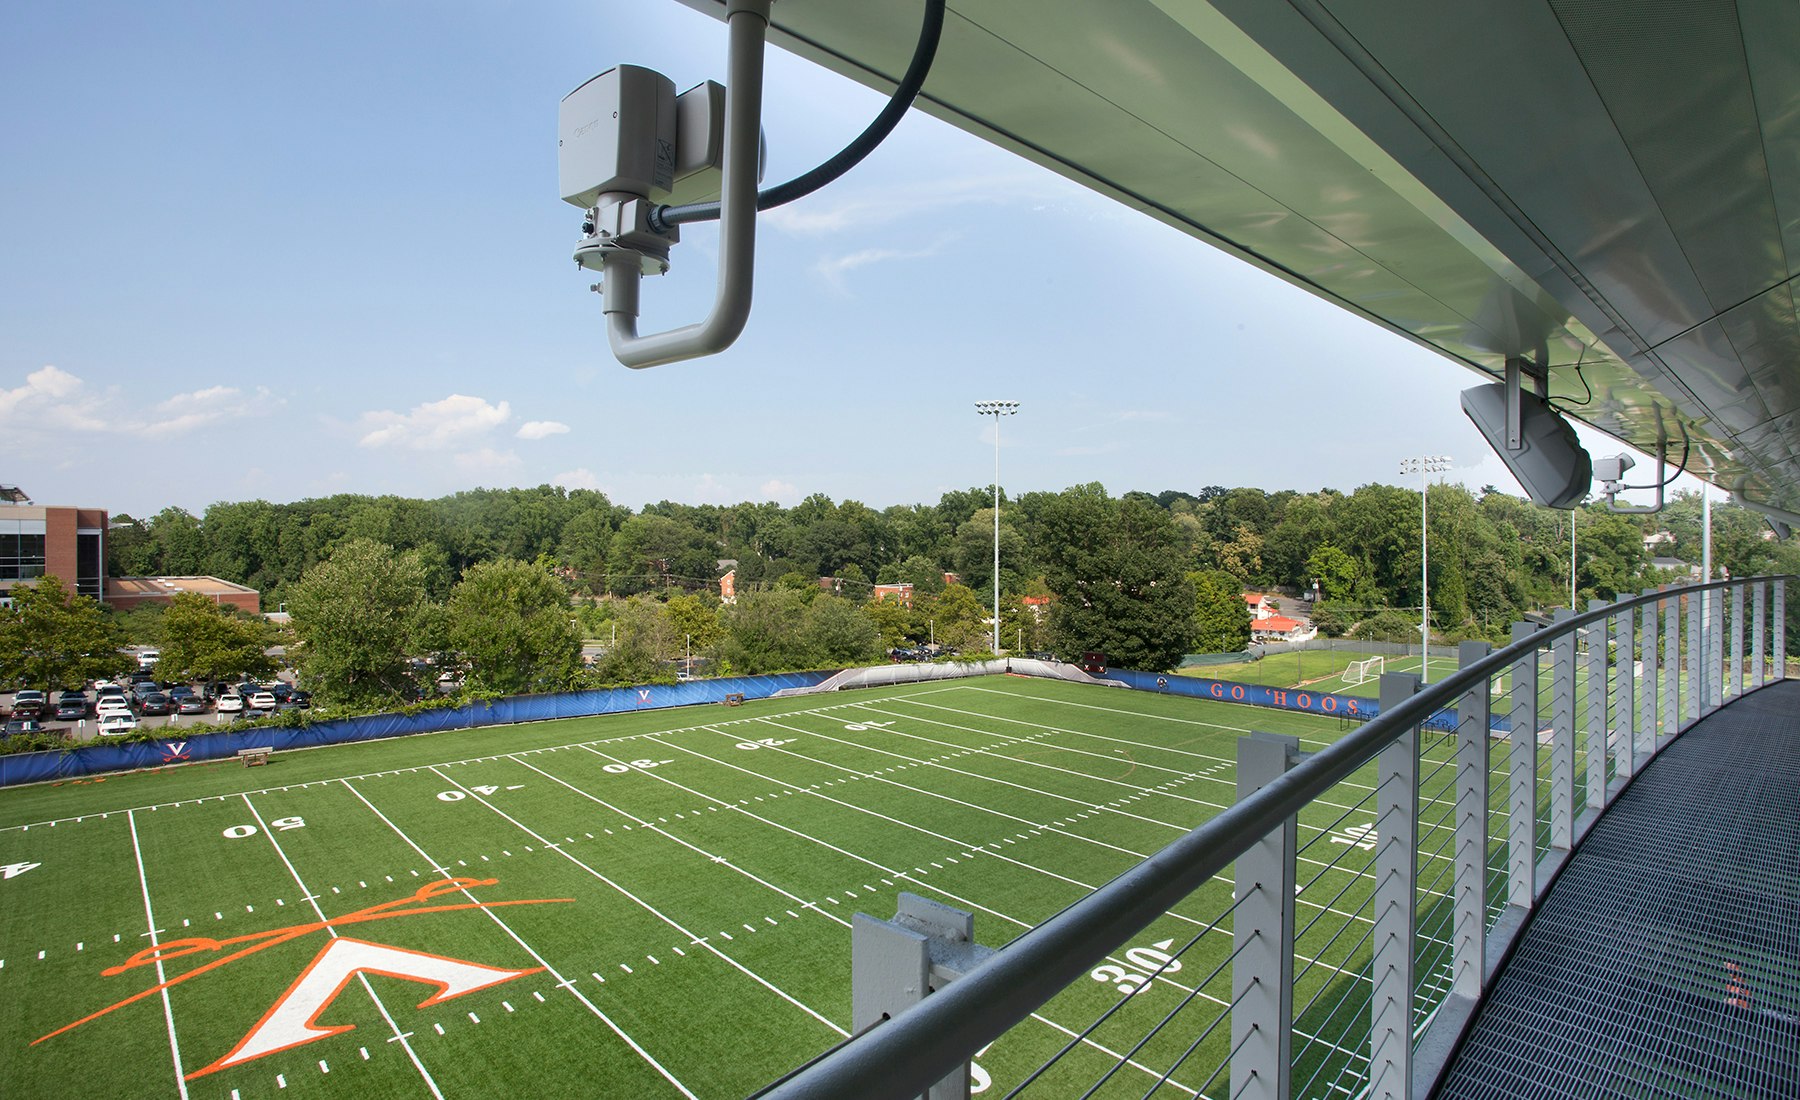 The single story, open volume facility features a small central platform for viewing by coaches and filming.